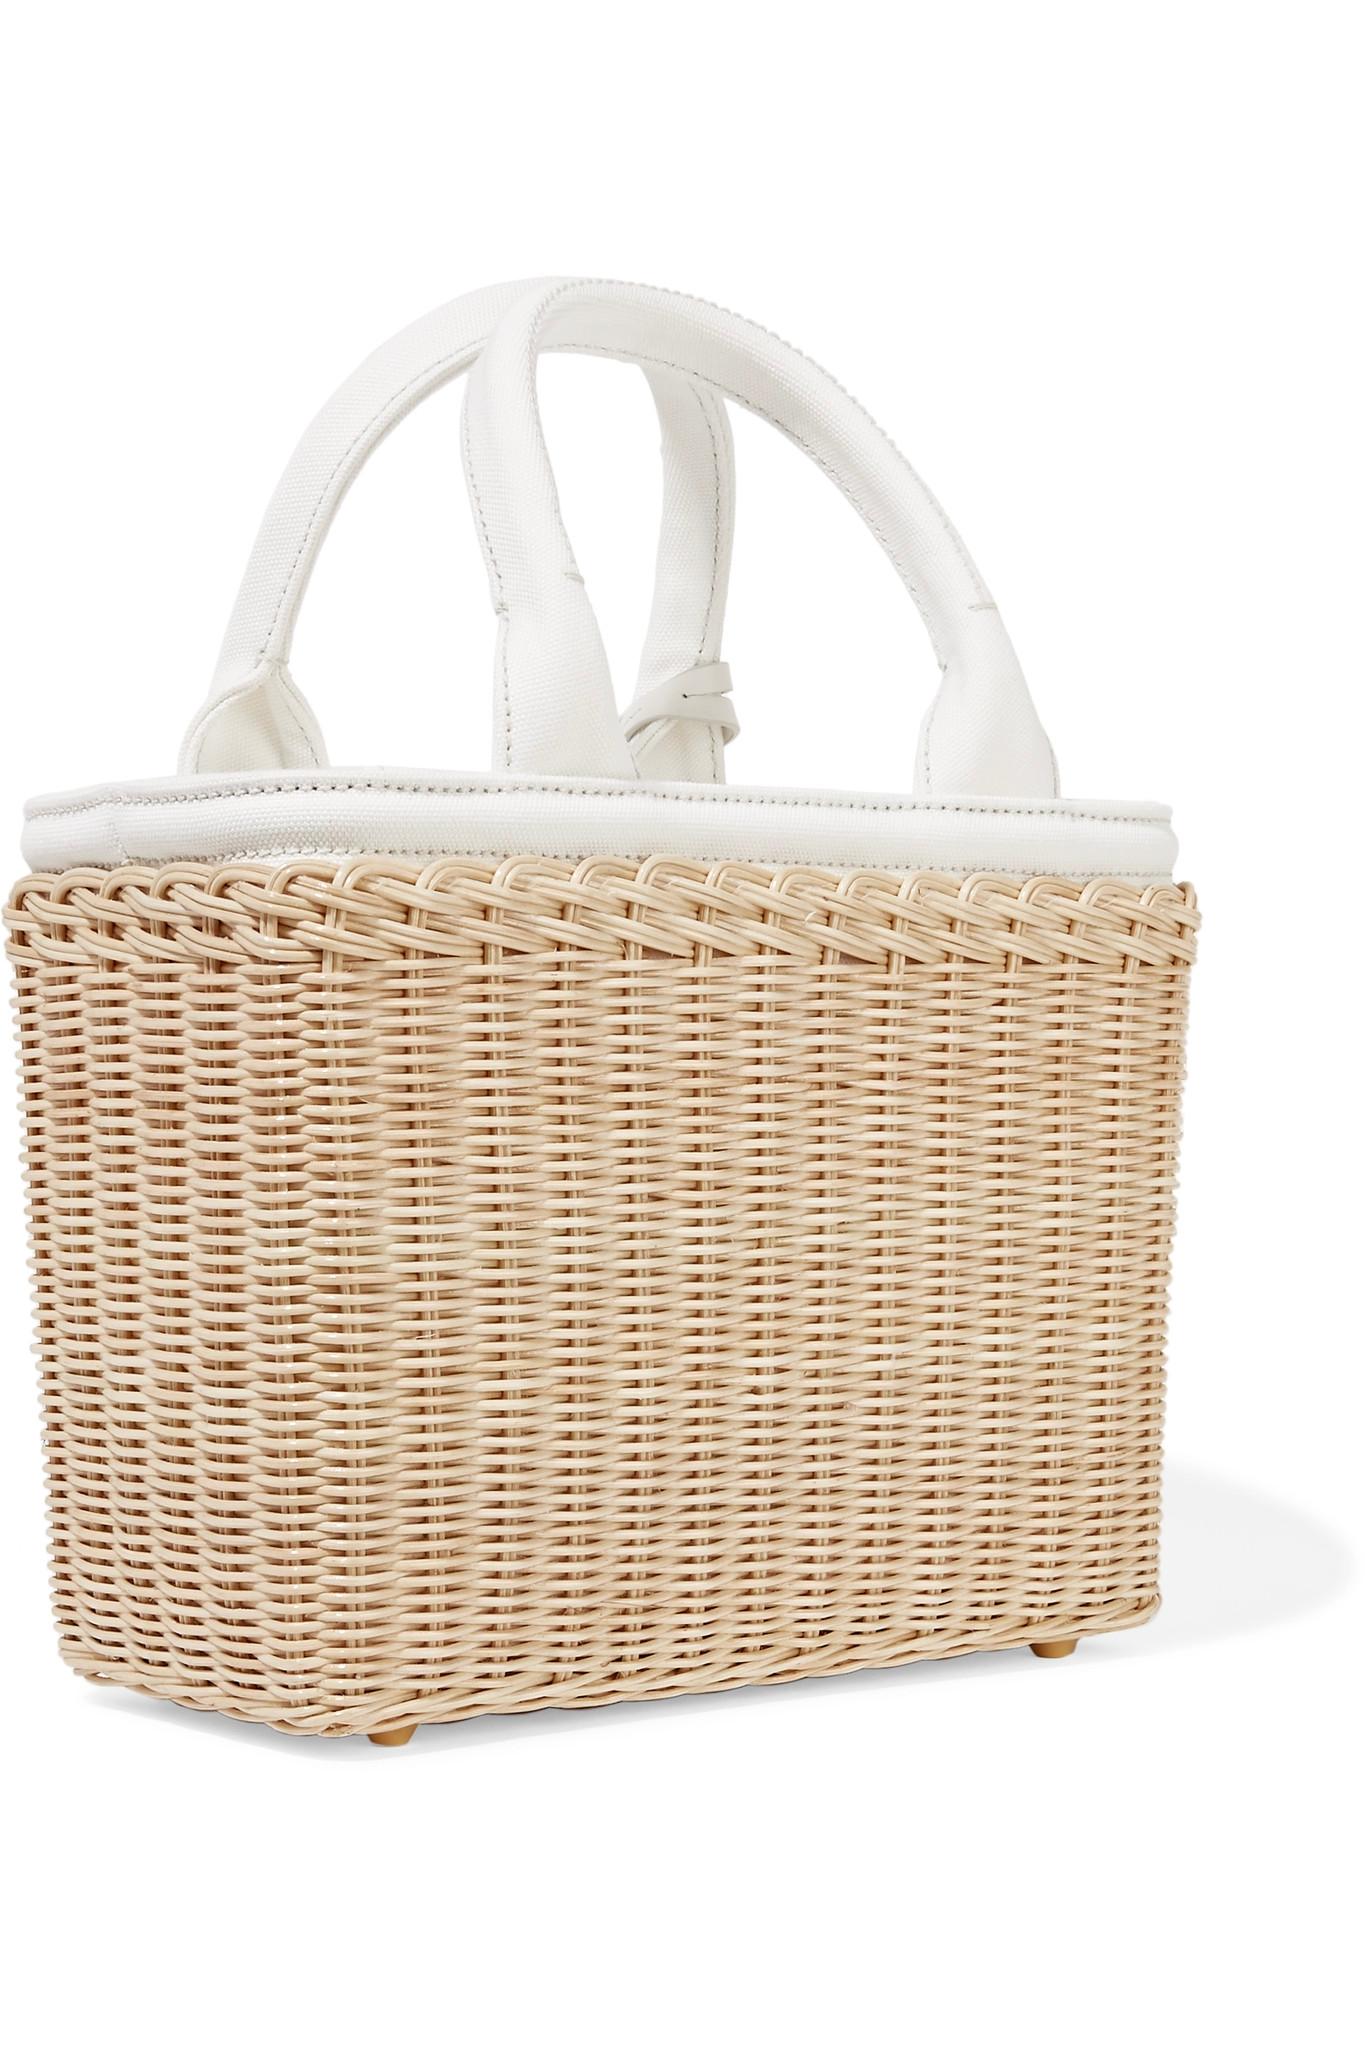 Lyst - Prada Midollino Small Leather-trimmed Canvas And Wicker Tote